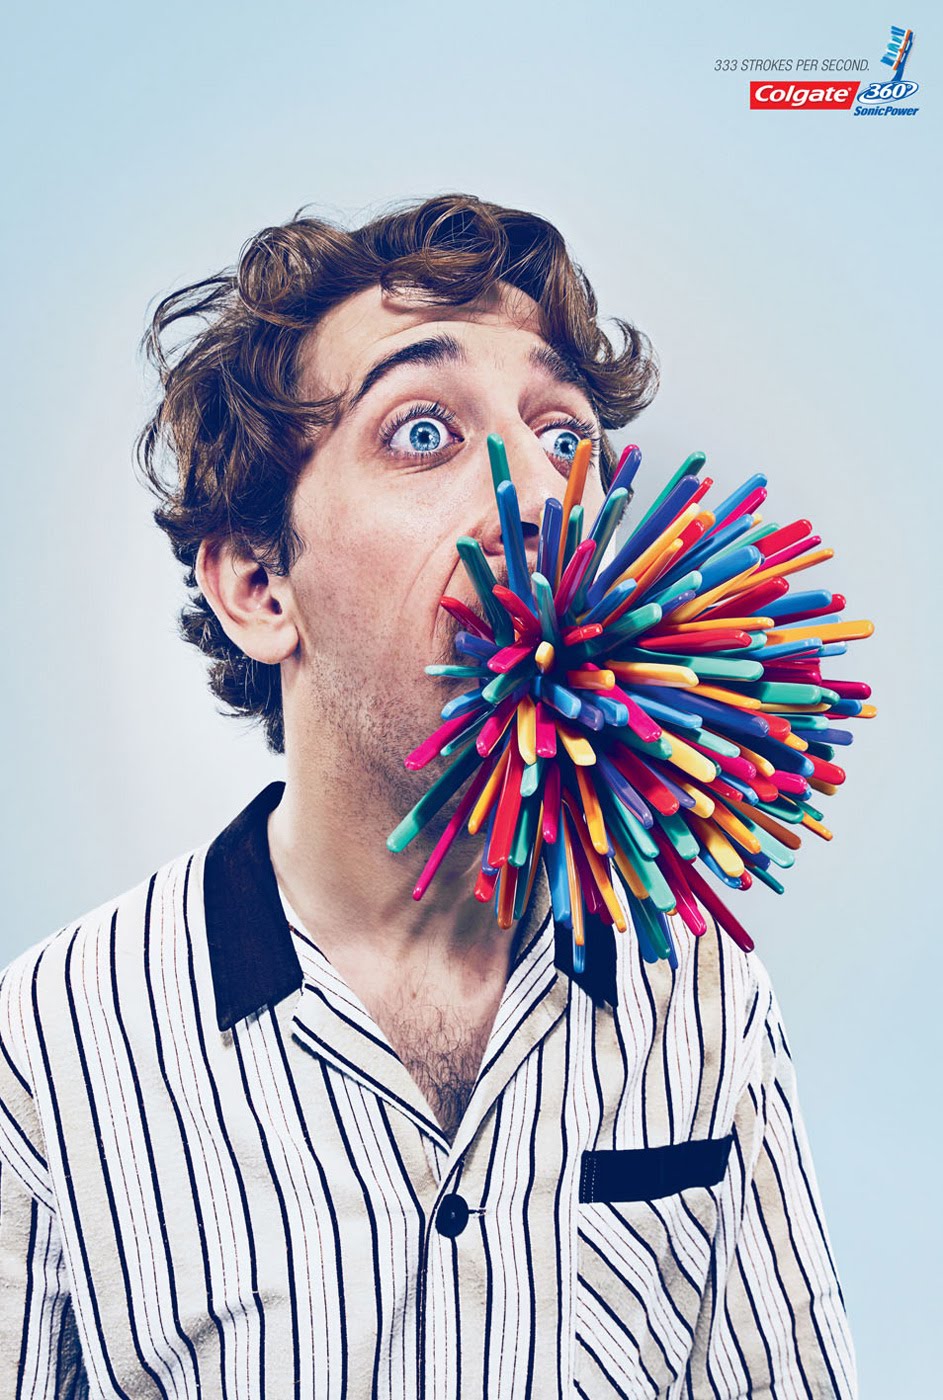 copyranter: The funniest toothbrush ad you'll ever see.